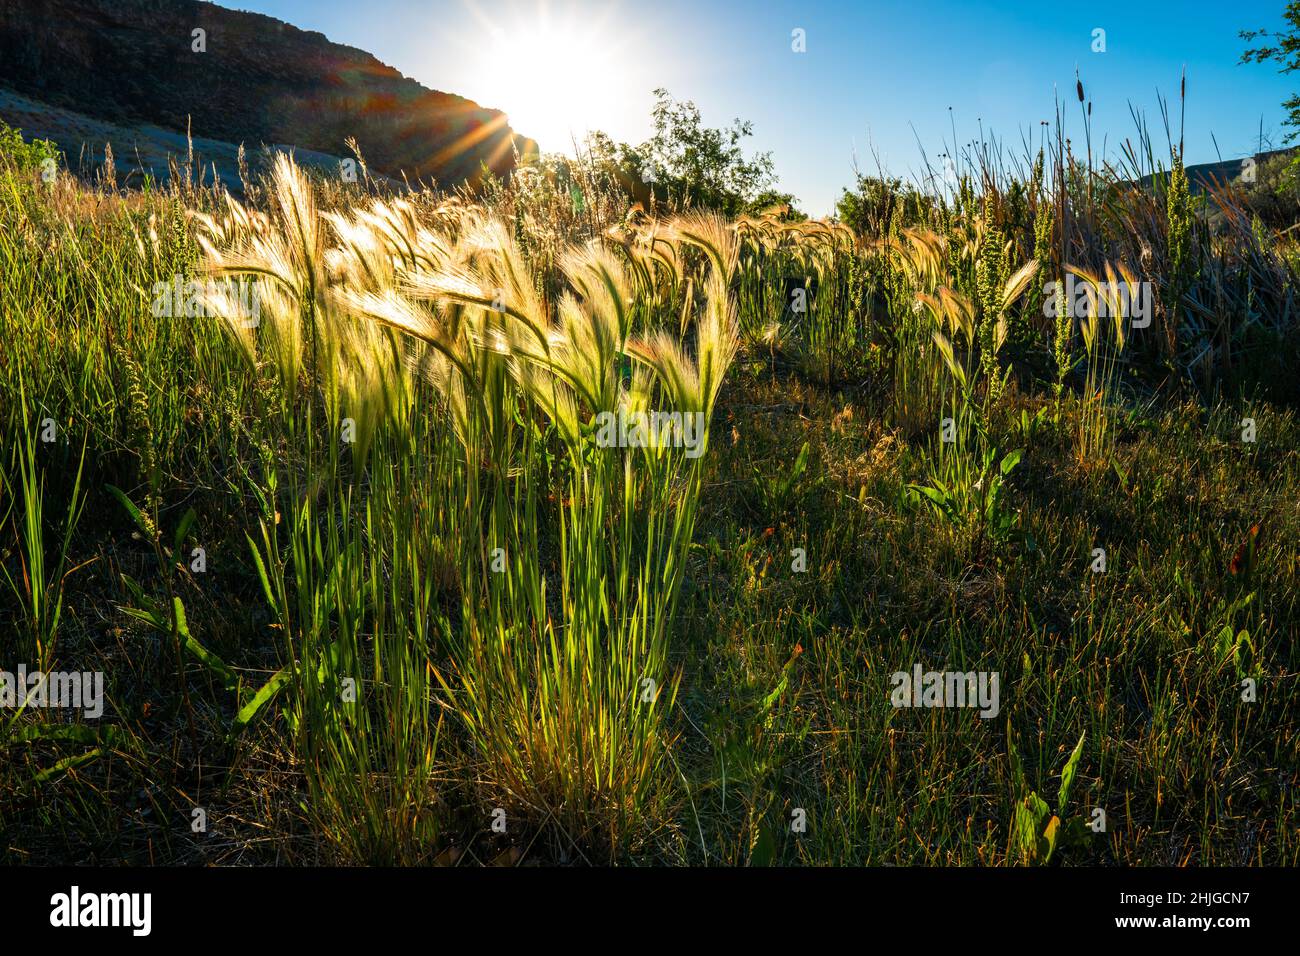 Bunches of foxtail barley (Hordeum jubatum) along with other grasses and forbs are backlit by the rising sun at Halverson Lake near Idaho's Celebratio Stock Photo